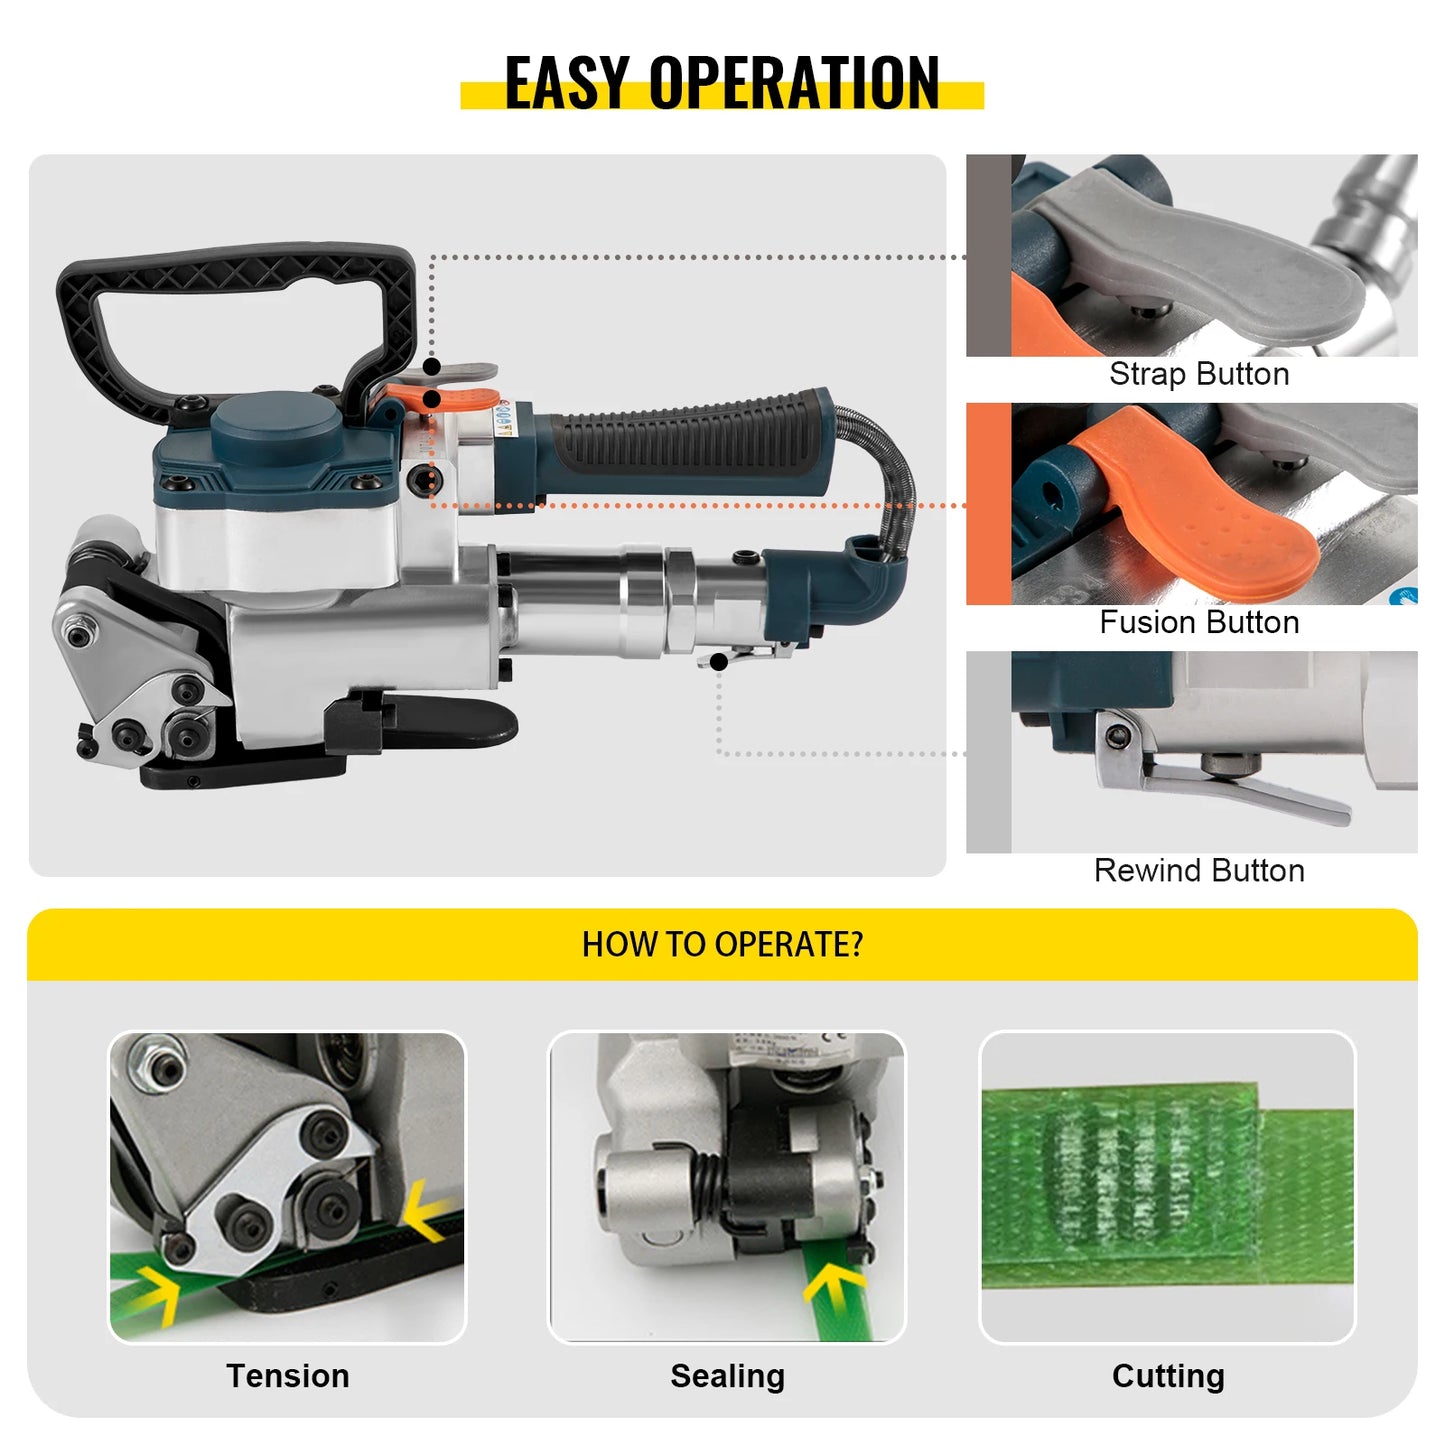 VEVOR B25 Handheld Pneumatic Strapping Machine 3500N Max Tension Hand Packing Machine Wrapping Tool